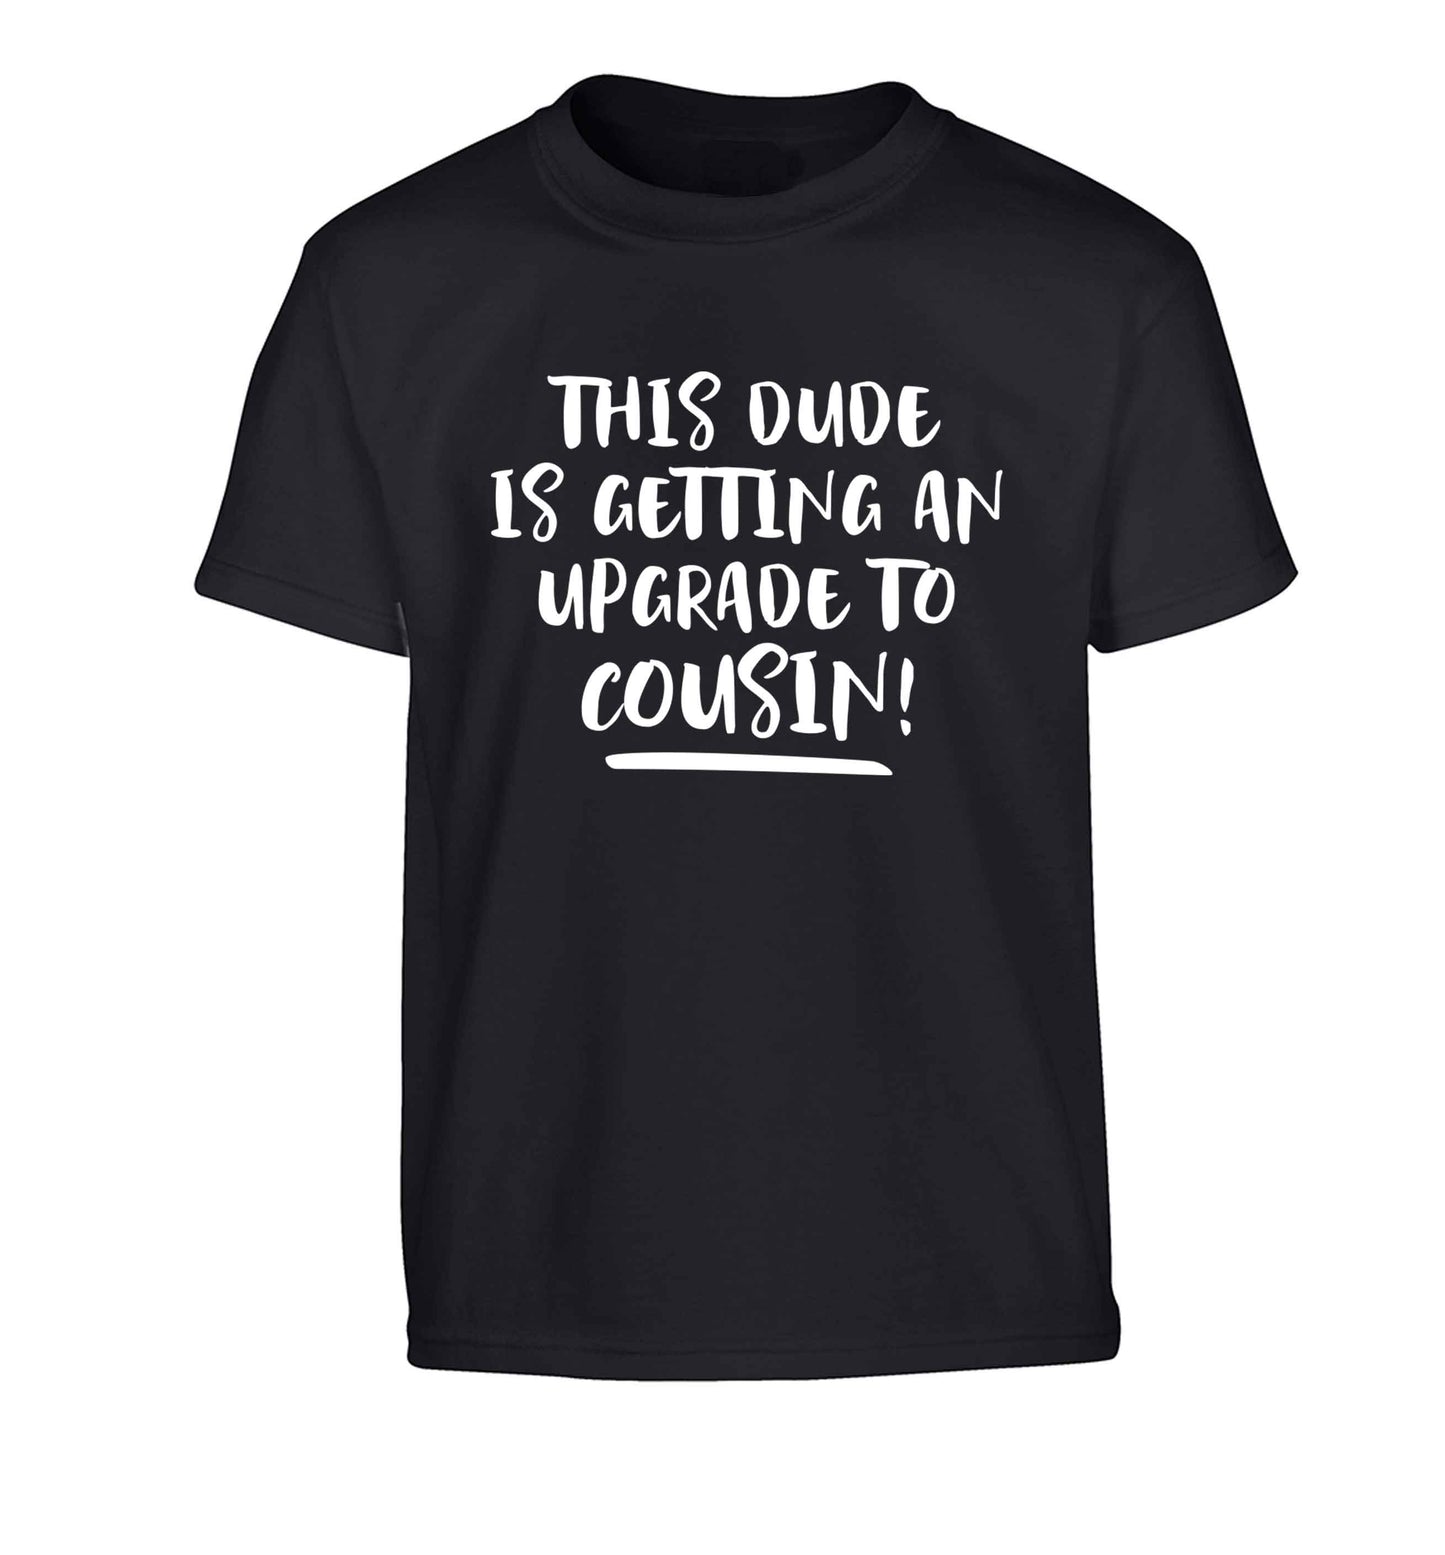 This dude is getting an upgrade to cousin! Children's black Tshirt 12-13 Years